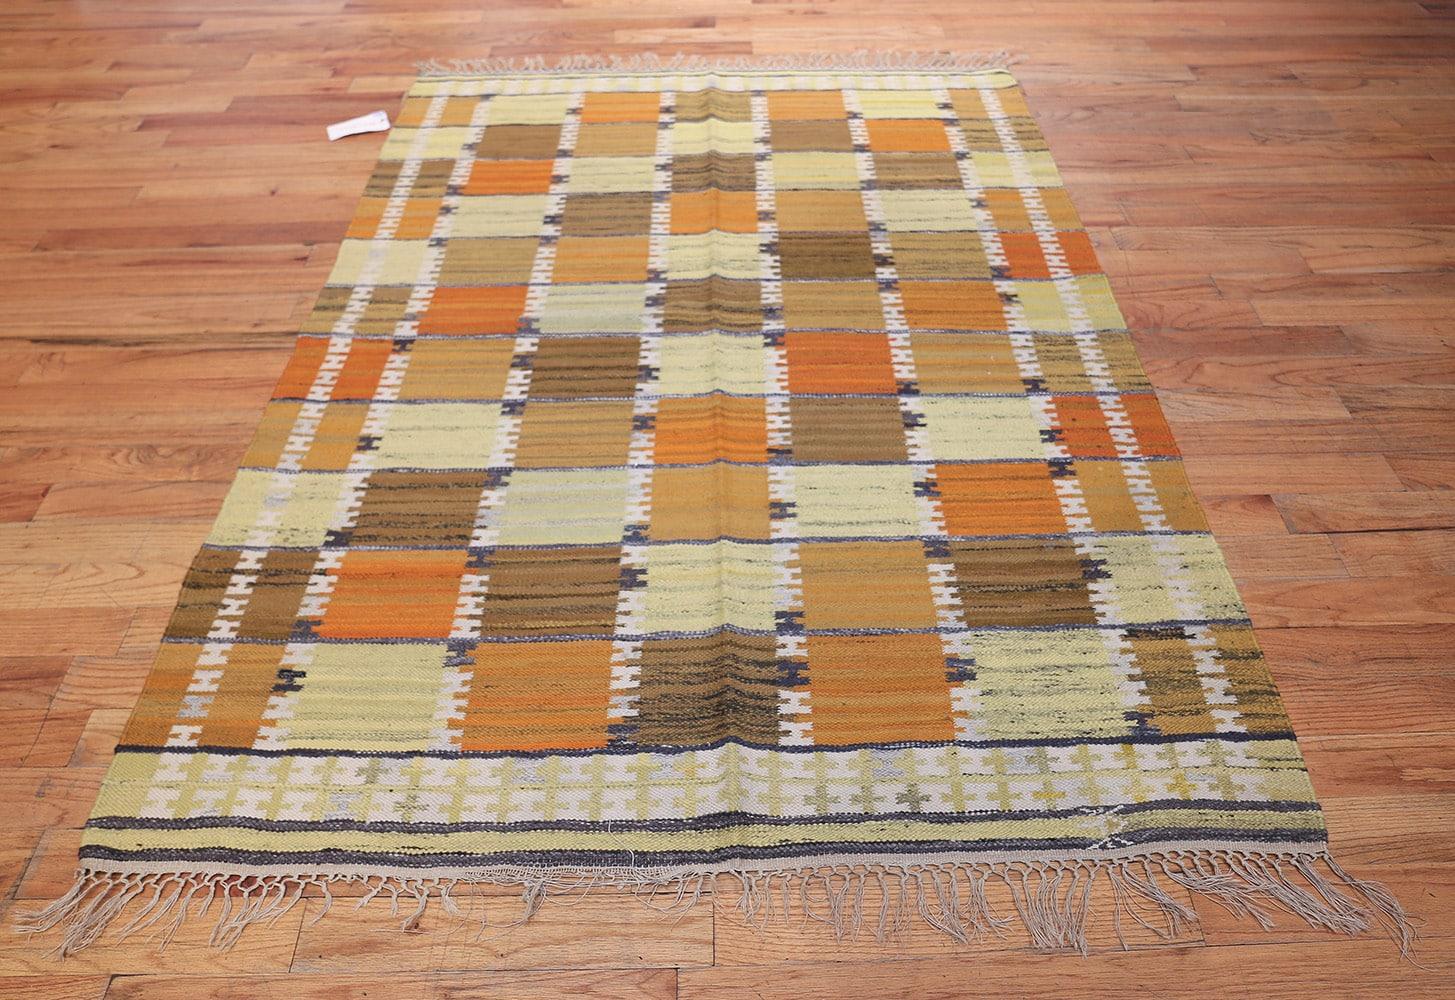 Vintage Scandinavian rug by Wanda Krakow, Origin: Sweden, circa mid-20th century. Size: 4 ft 8 in x 6 ft 8 in (1.42 m x 2.03 m)

This wonderfully modern midcentury vintage rug features a stark, well-defined pattern of repeating tiles that are